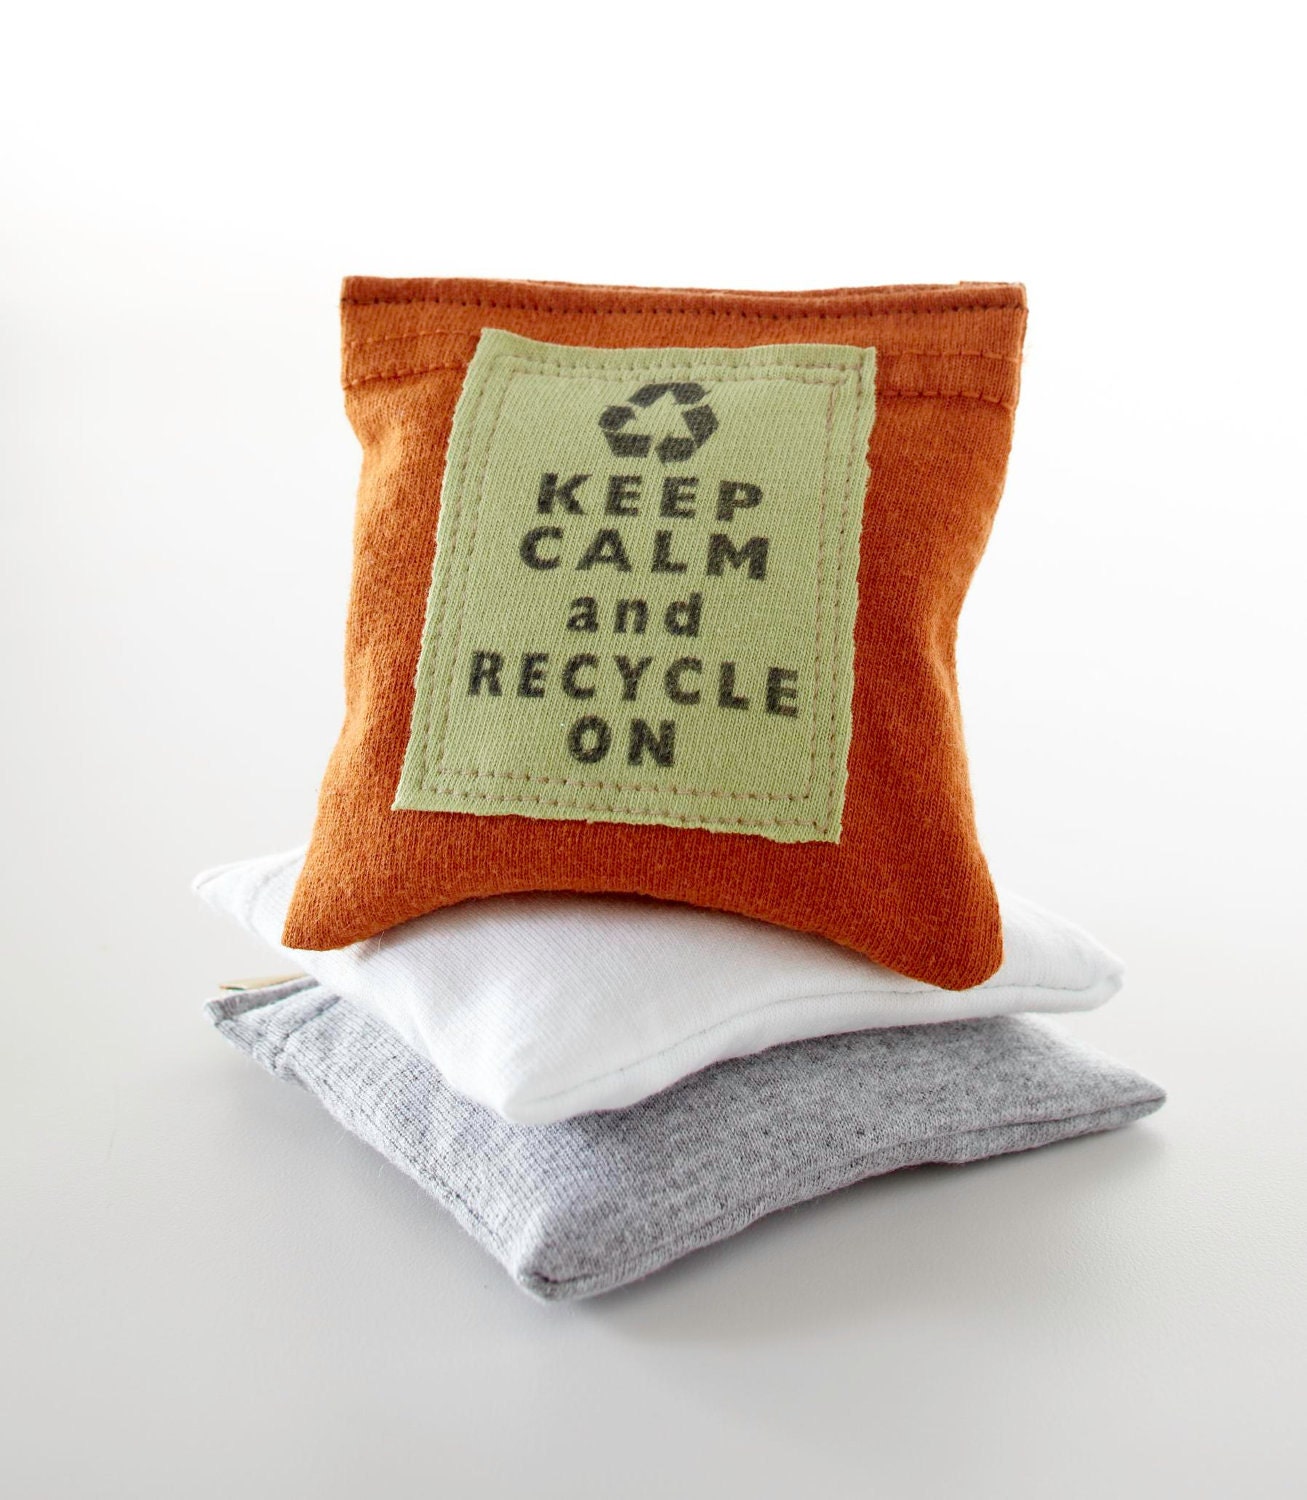 Lavender Sachet Pillow Gift Keep Calm and Recycle On SET of THREE